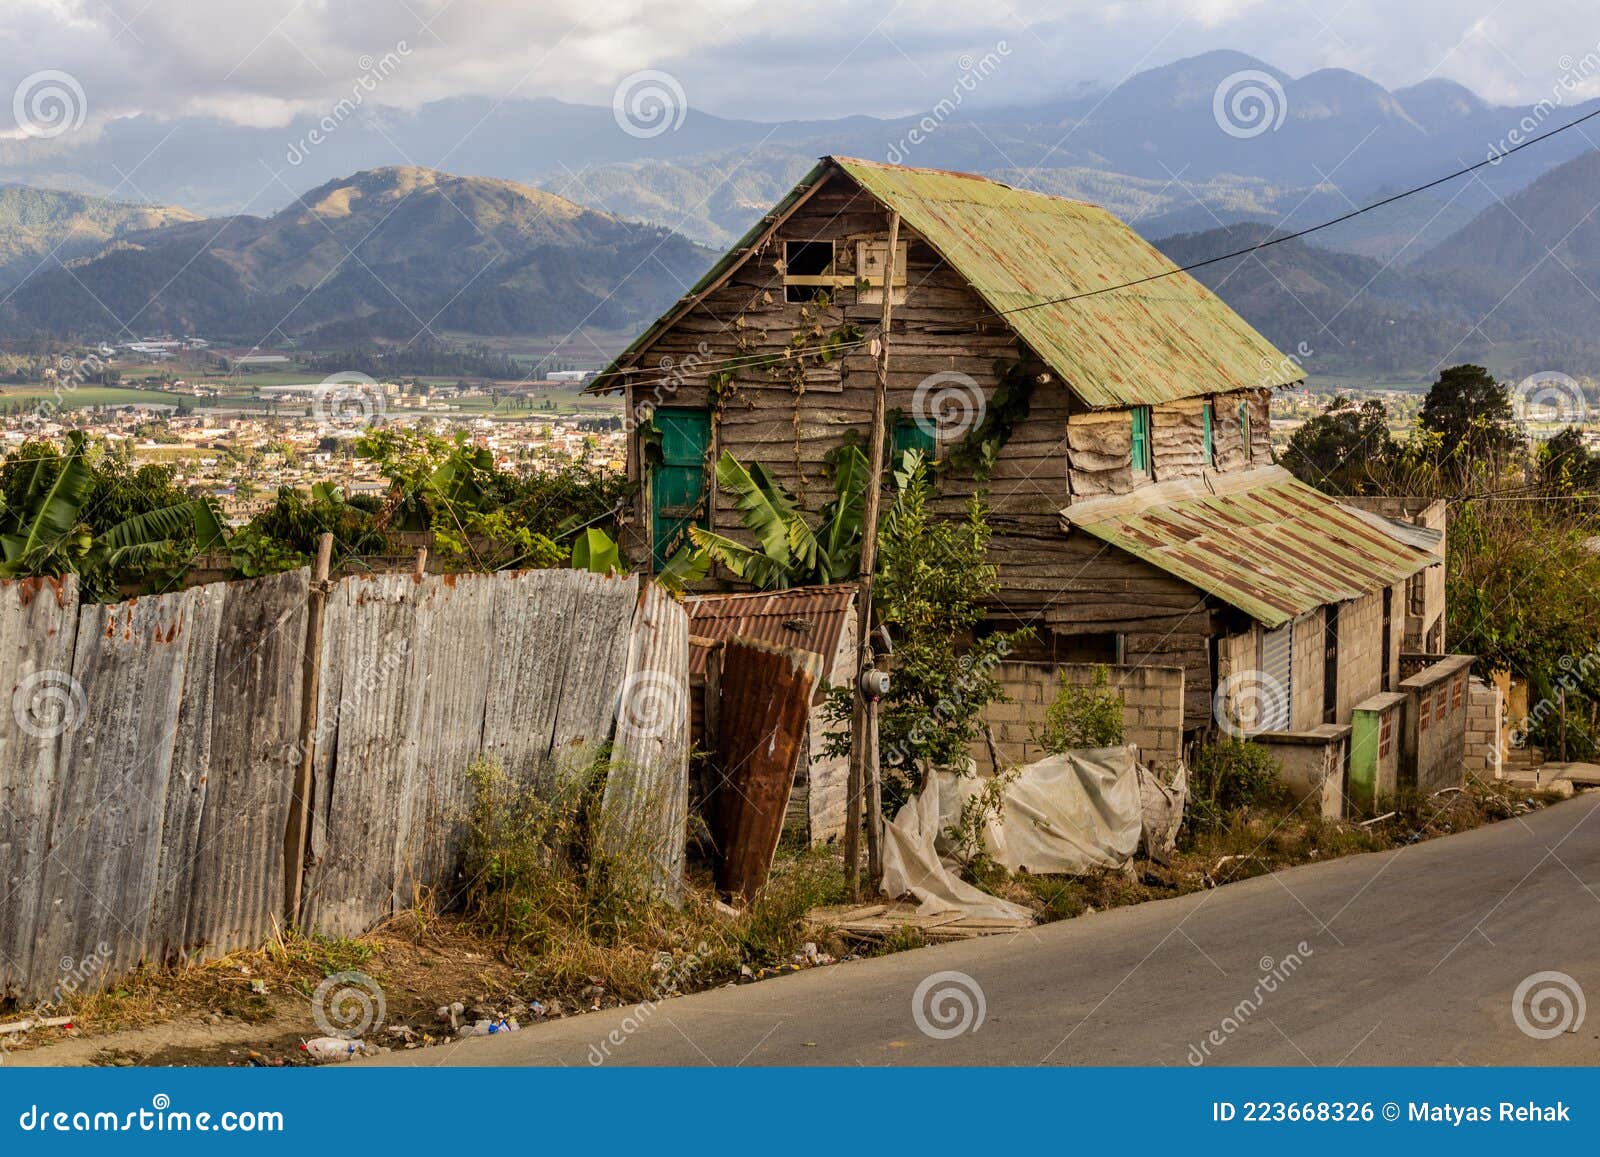 wooden house in constanza, dominican republ